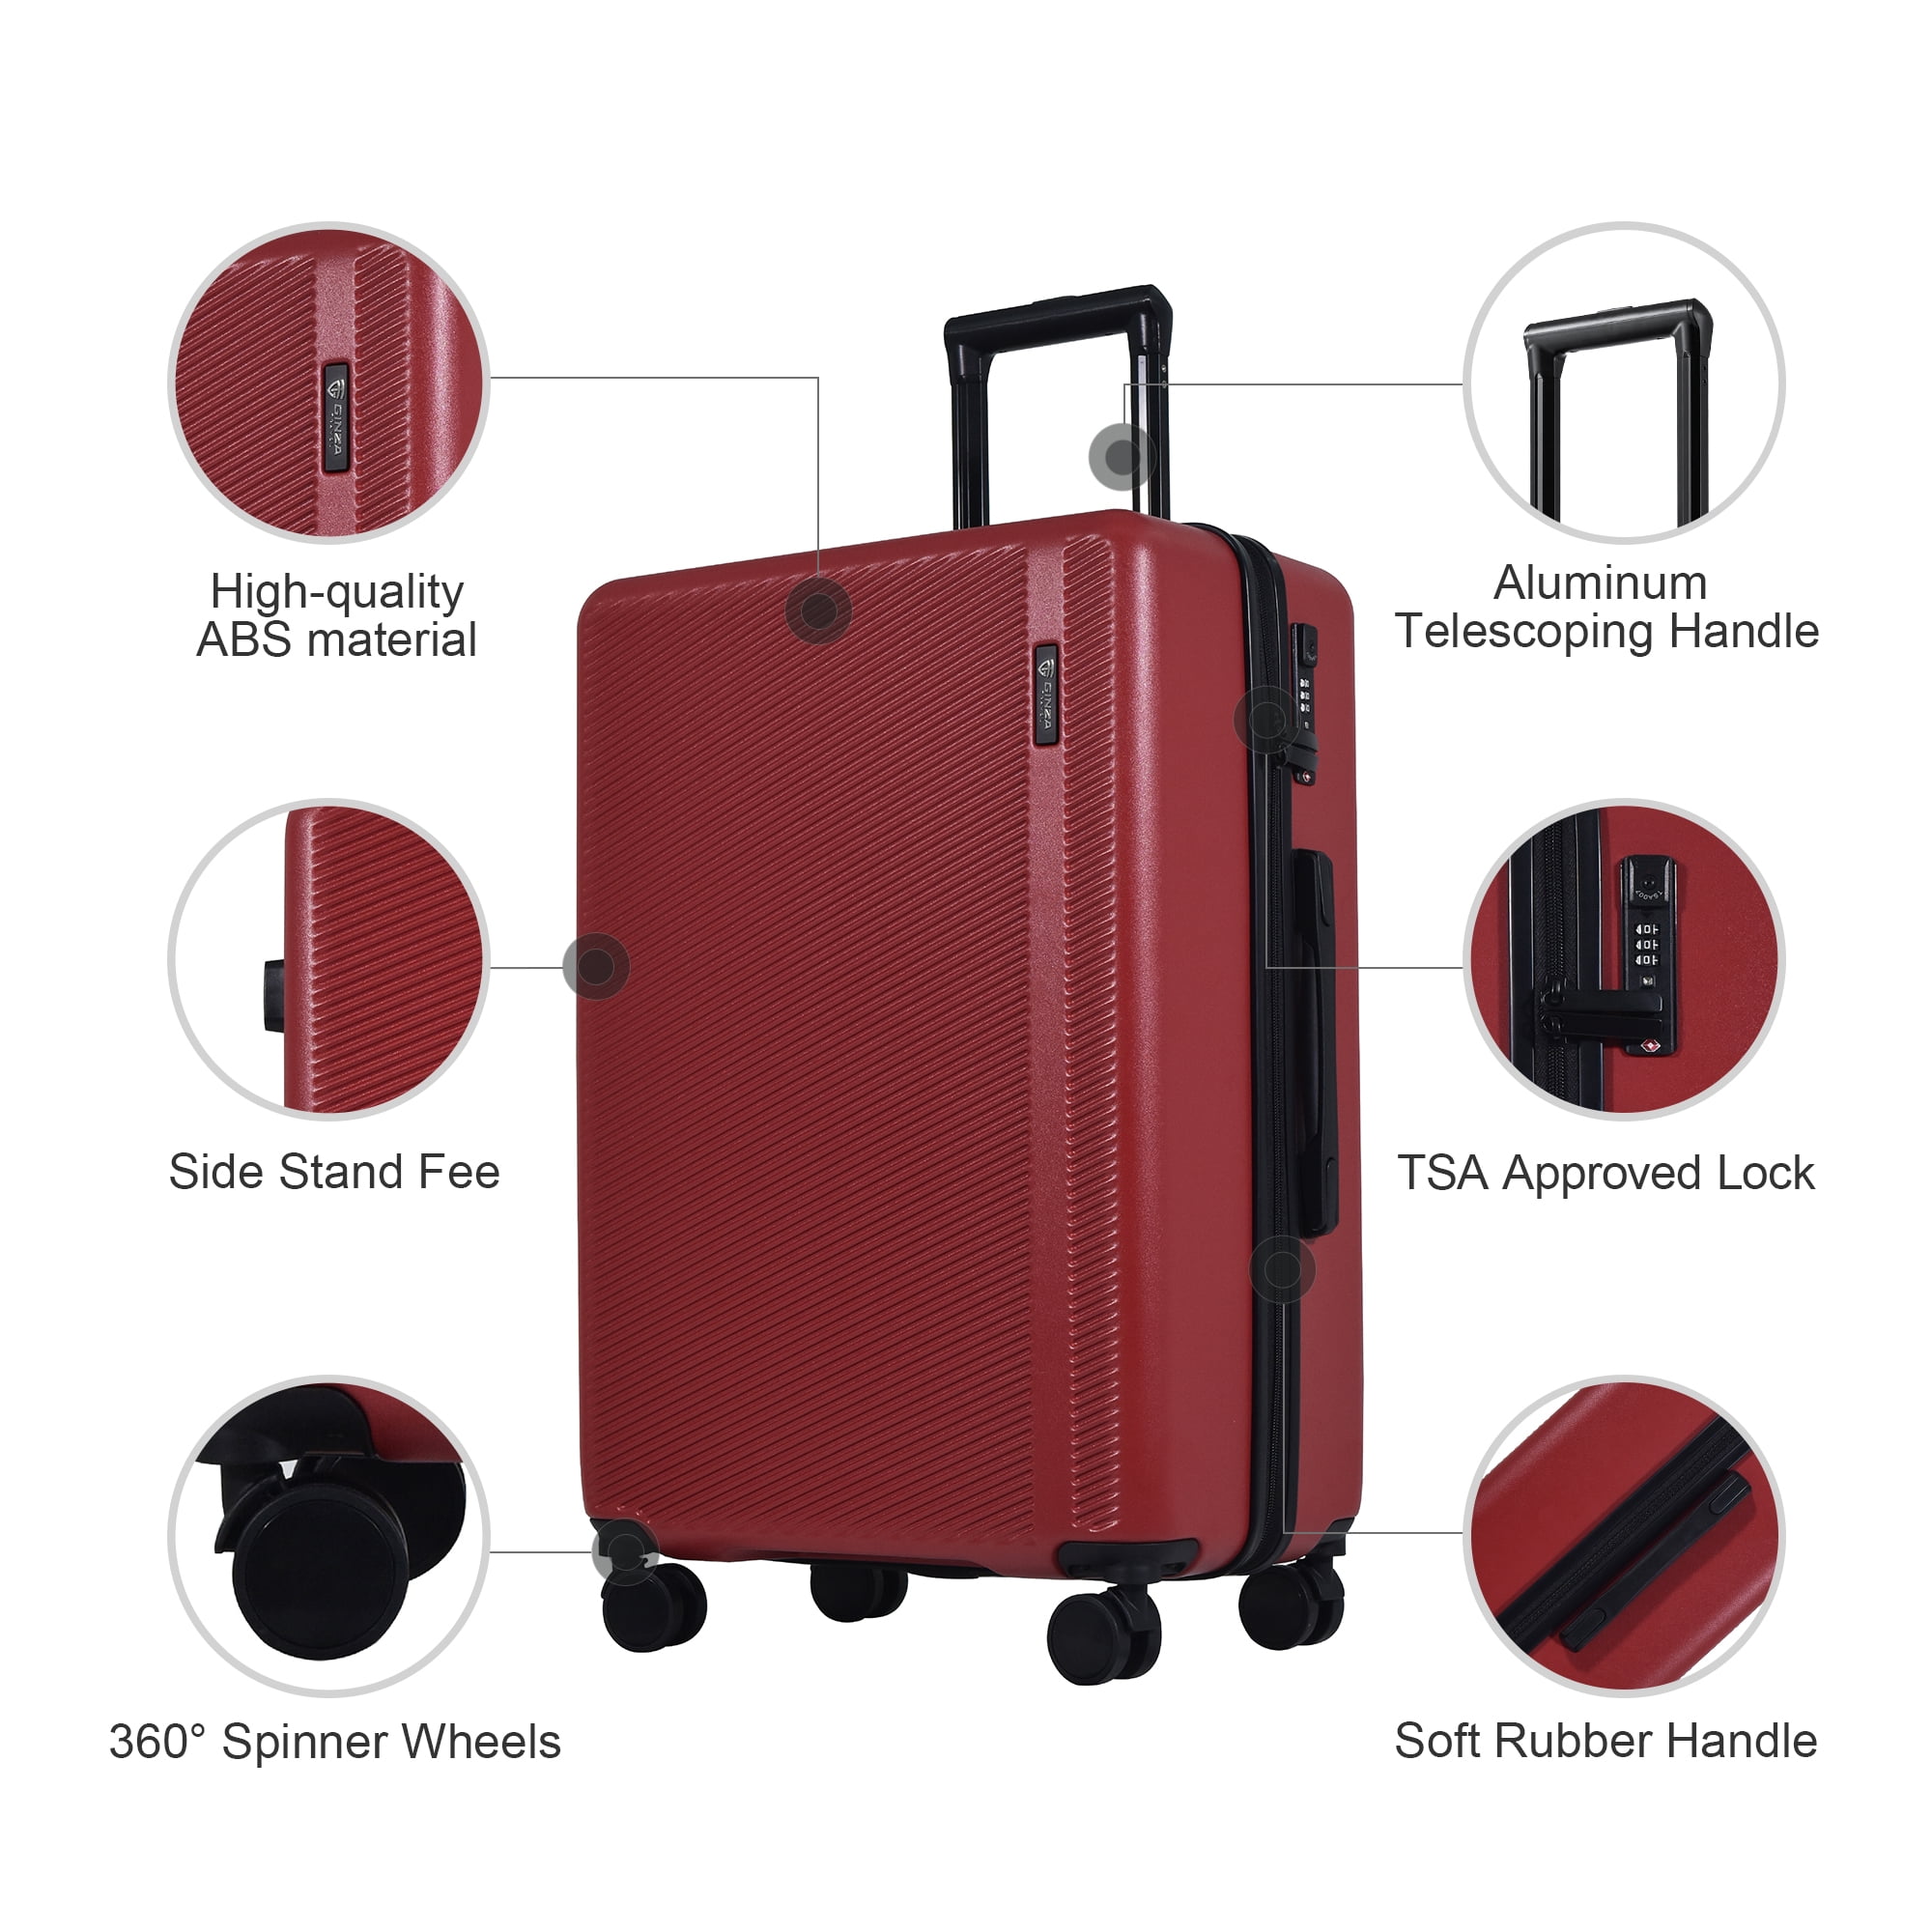 Ginza Travel 3 Piece Hardside Expandable Luggage Set,Large Luggage with Double Spinner Wheels,Deep Pink, Size: 3Pcs(202428), Purple